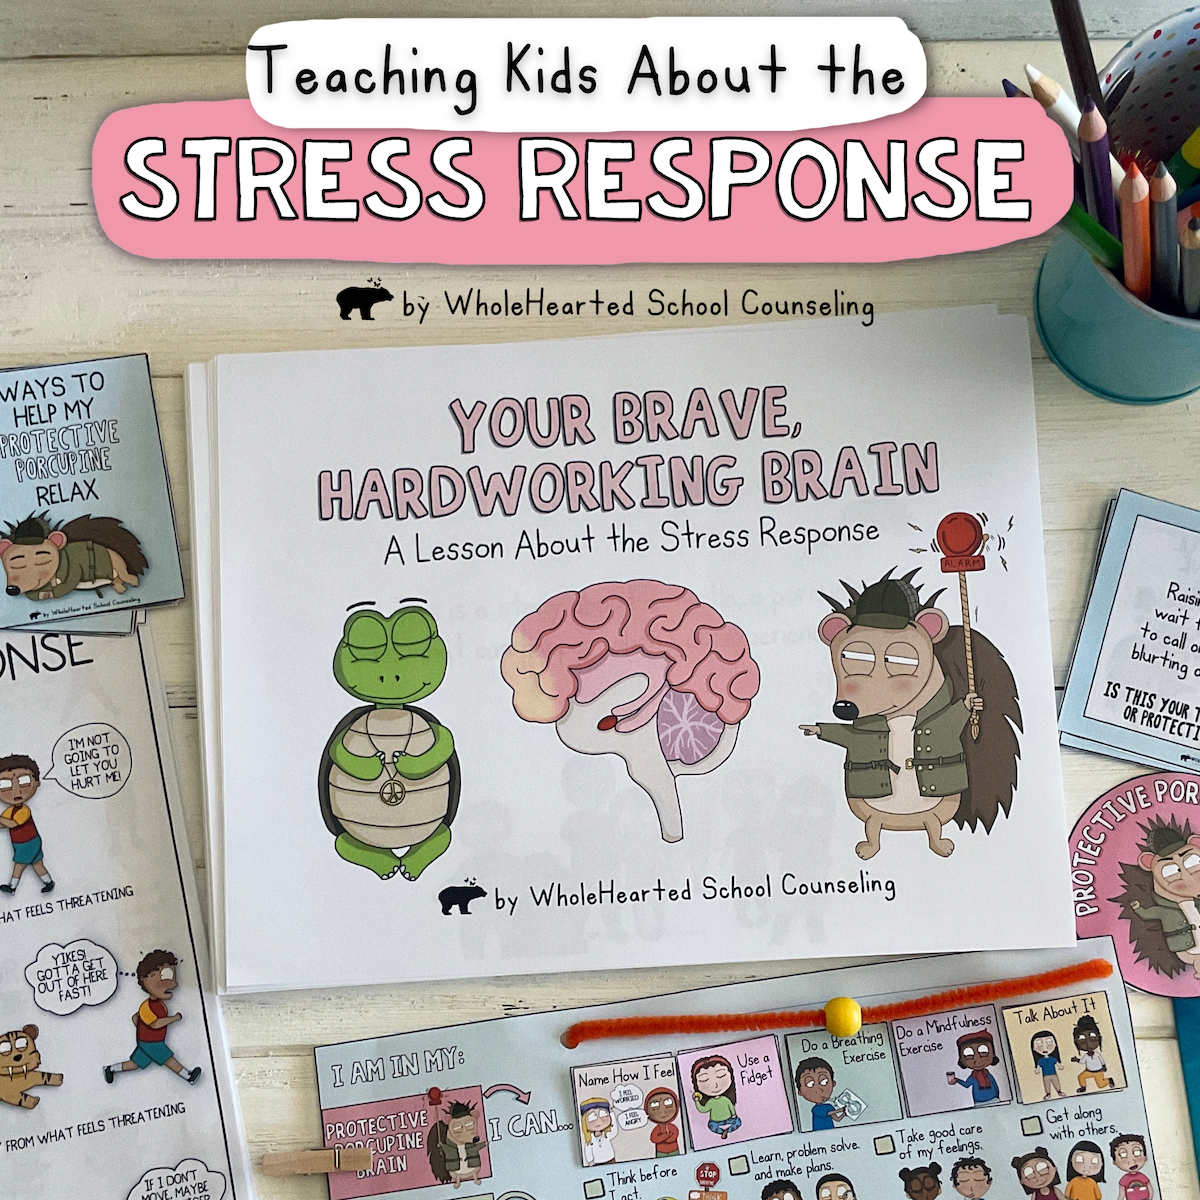 Lesson materials for Your Brain and the Stress Response SEL Lesson. Task cards, Feelings Check In and posters included.